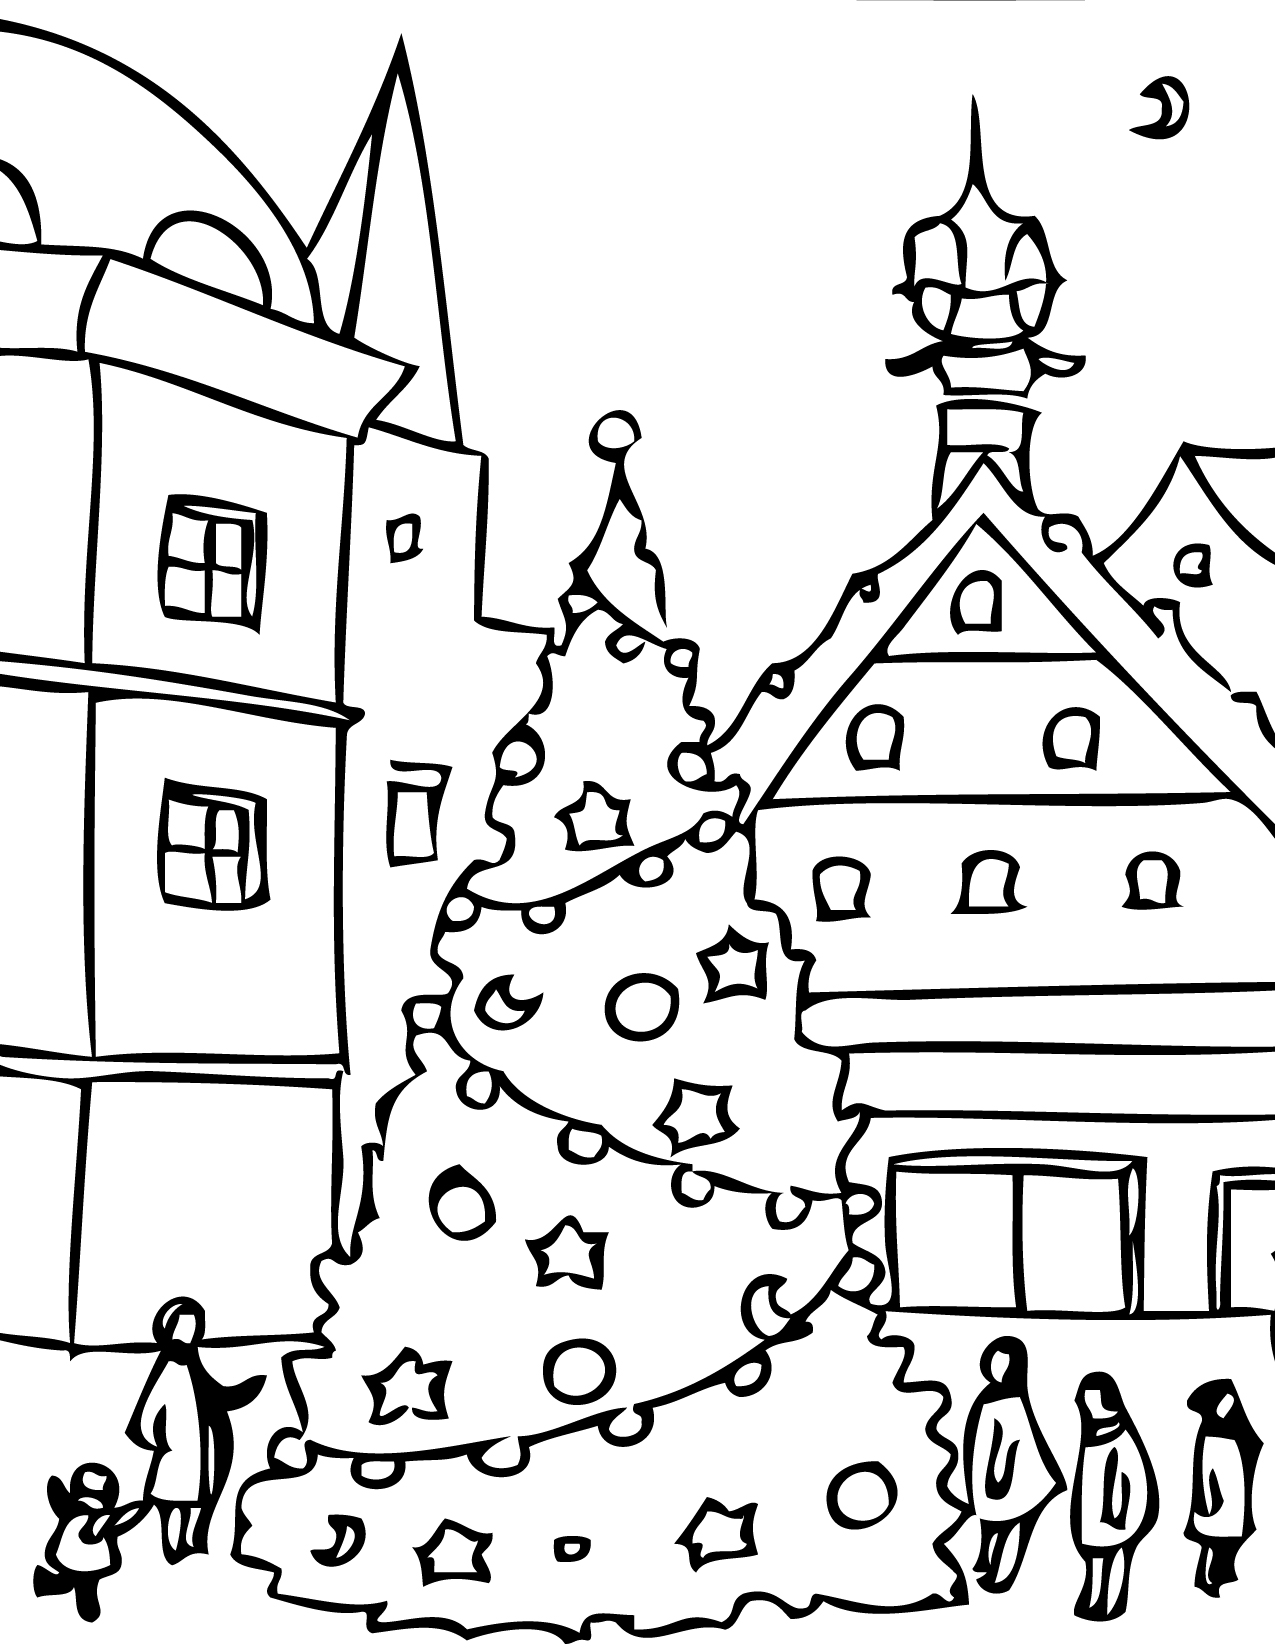 Holidays coloring pages download and print for free